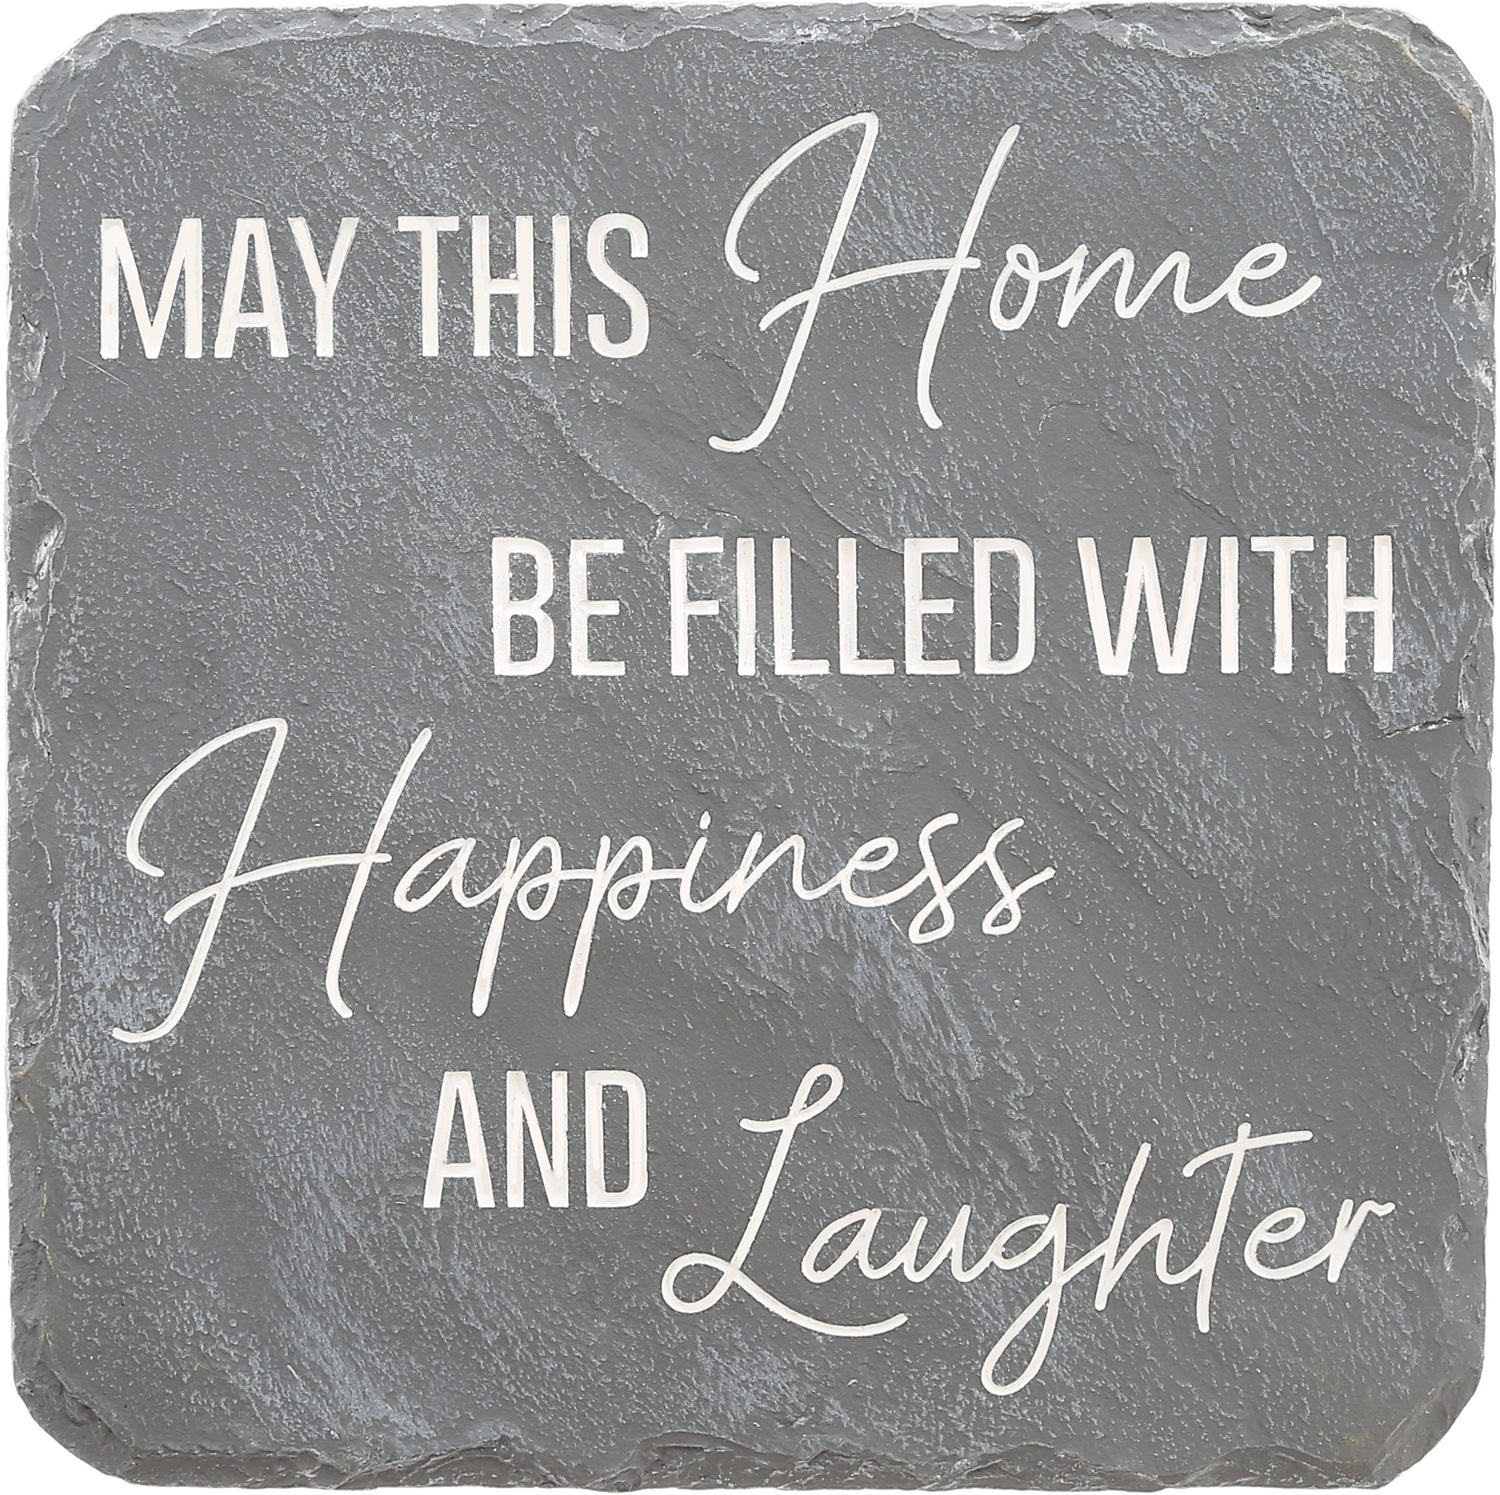 Happiness & Laughter by Stones with Stories - Happiness & Laughter - 7.75" x 7.75" Garden Stone